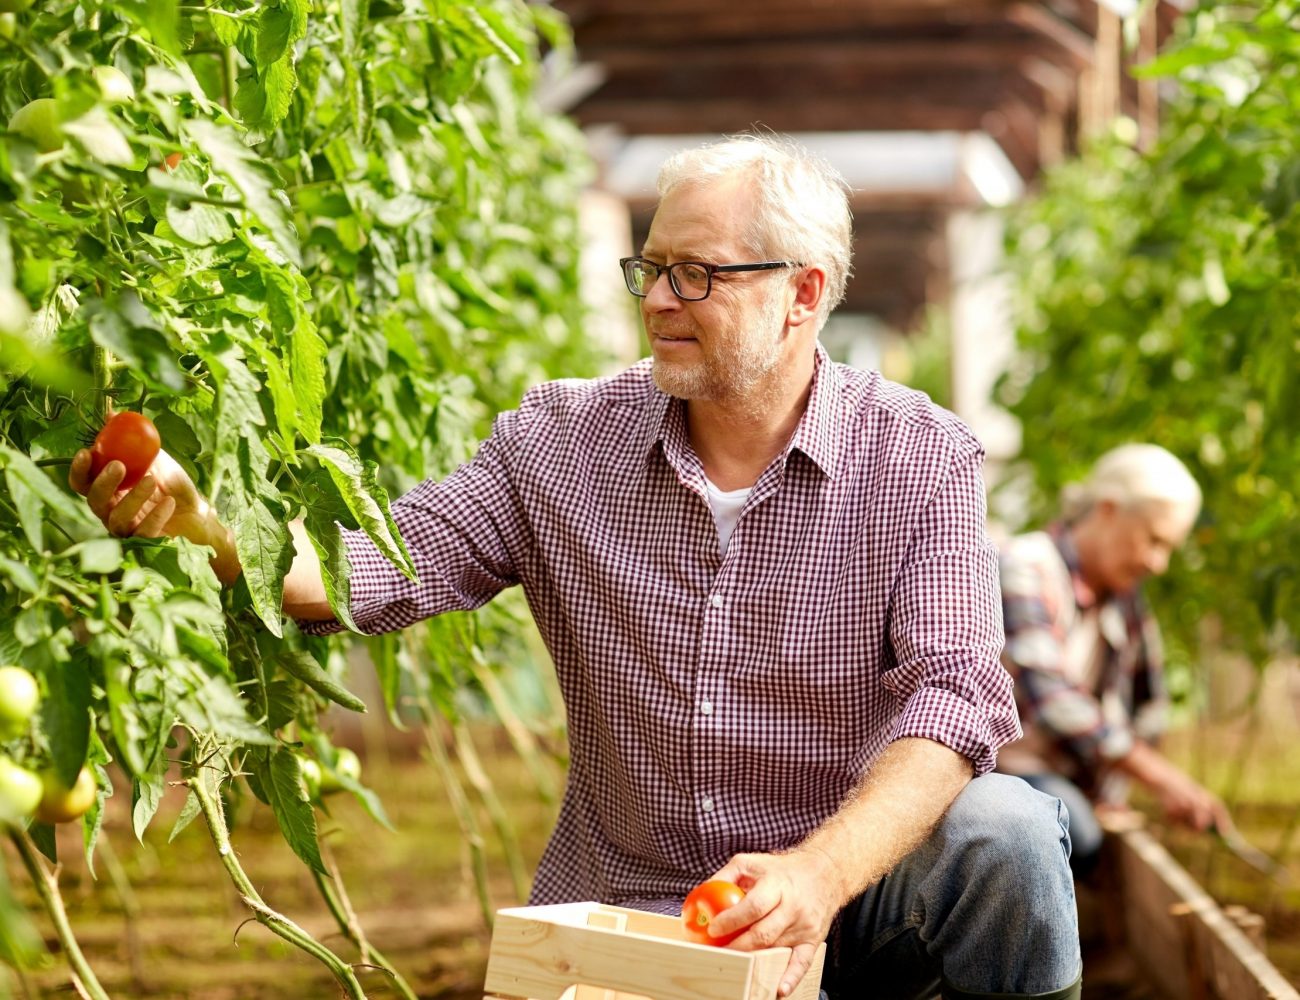 old-man-picking-tomatoes-up-at-farm-greenhouse-P592H4A-scaled.jpg